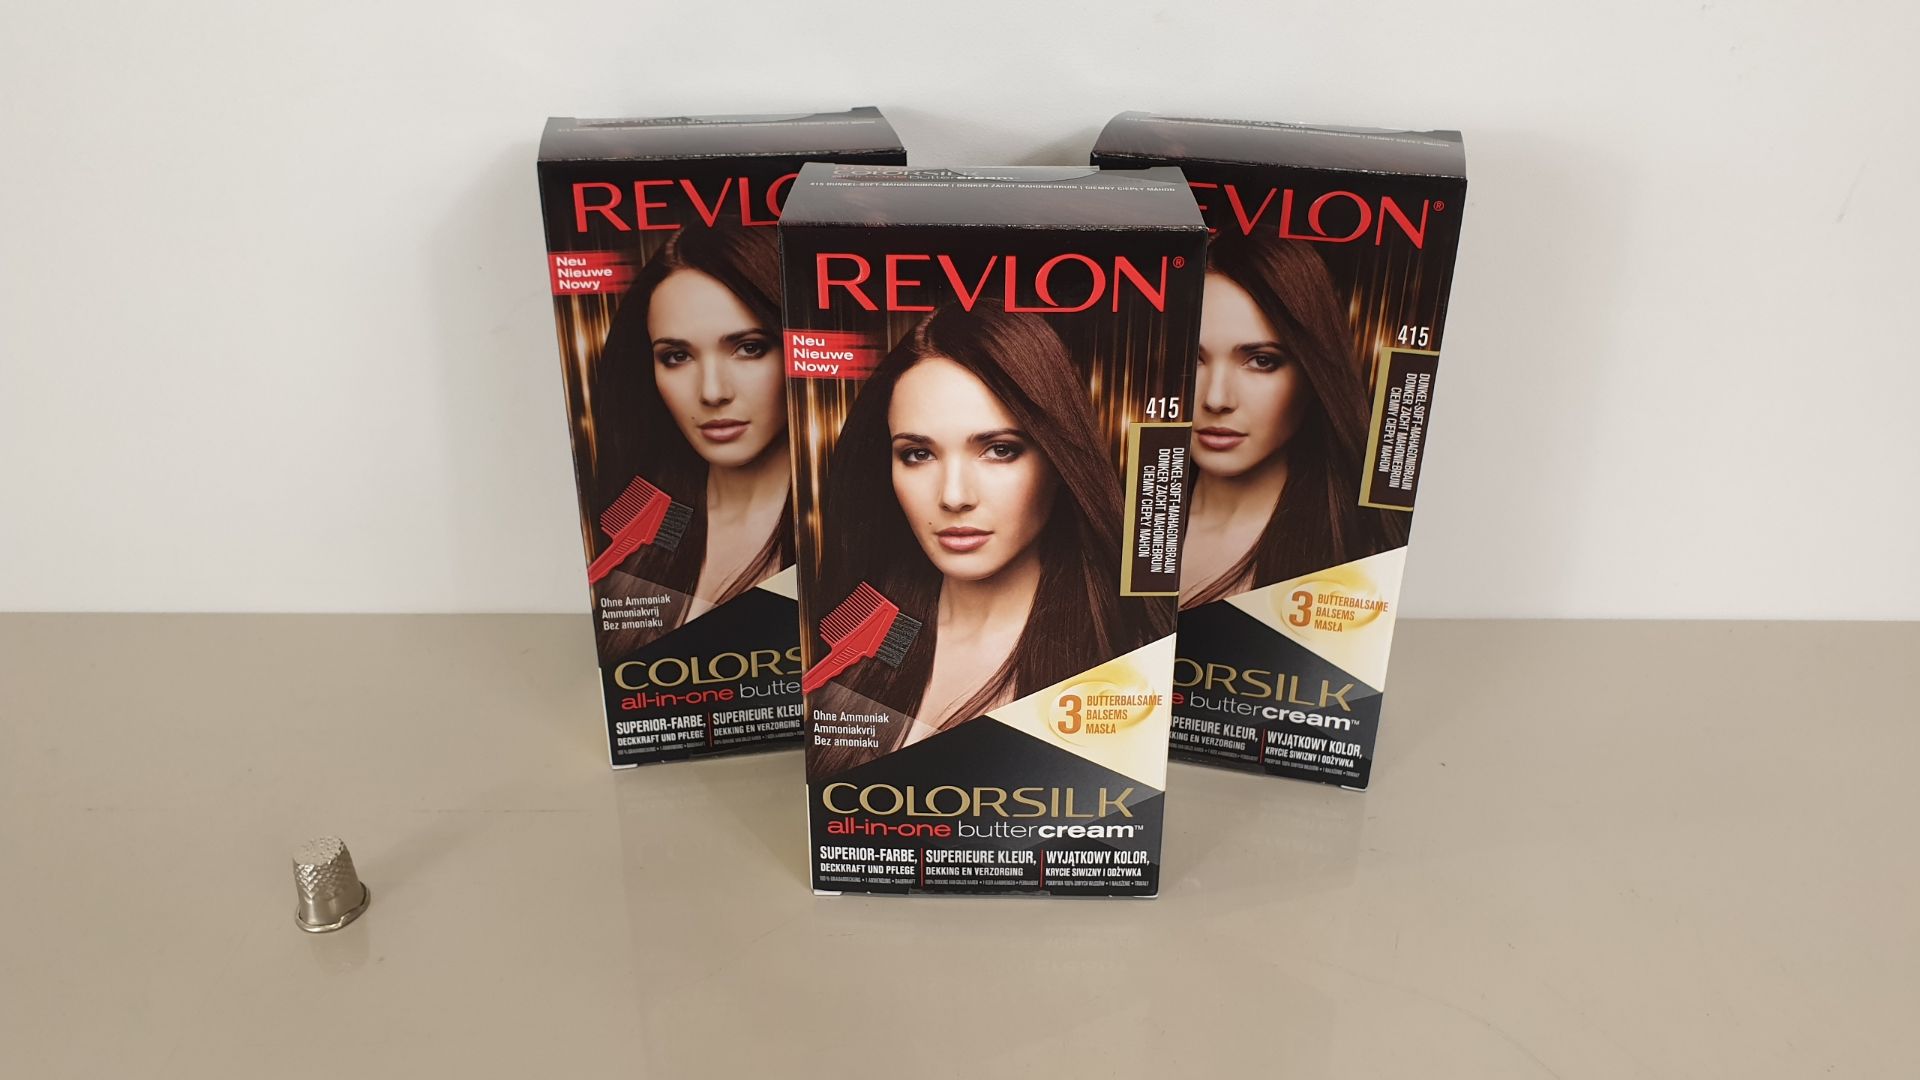 48 X BRAND NEW BOXED REVLON ( COLORSILK ALL IN ONE) MAHOGANY BROWN BUTTERCREAM - IN 4 BOXES